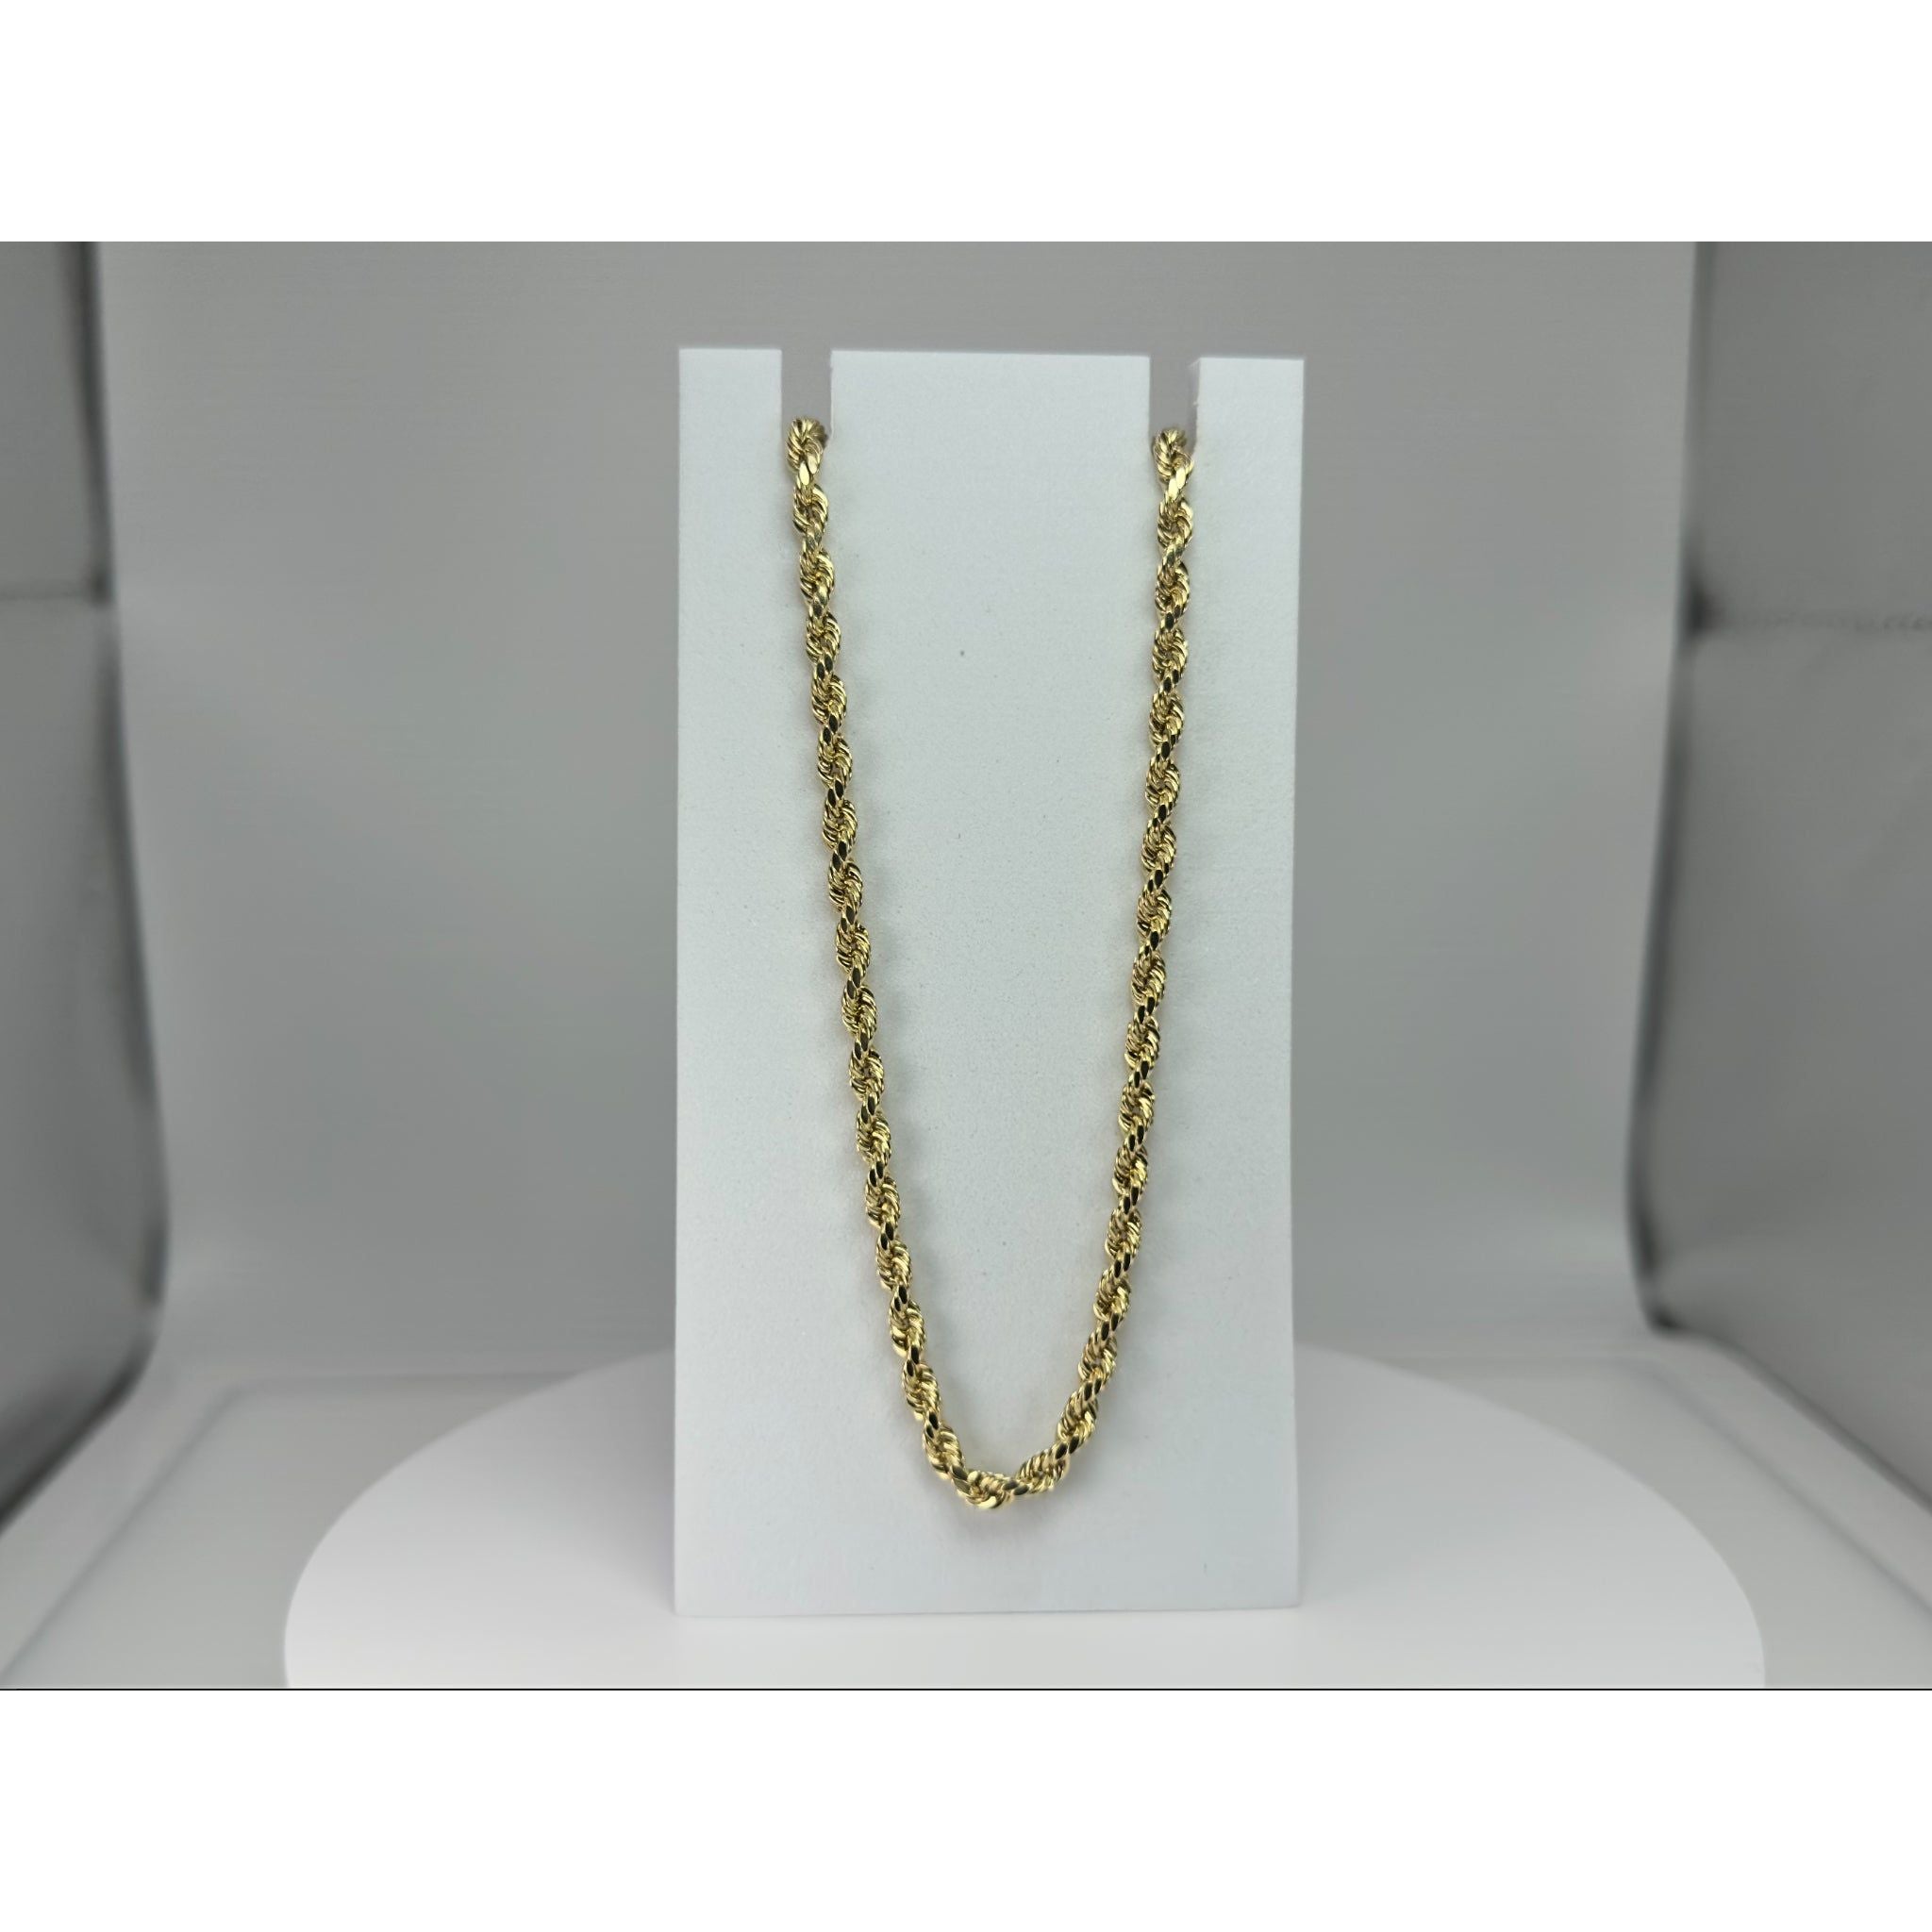 DR1733 - 14K Yellow Gold - Men's Gold Chains